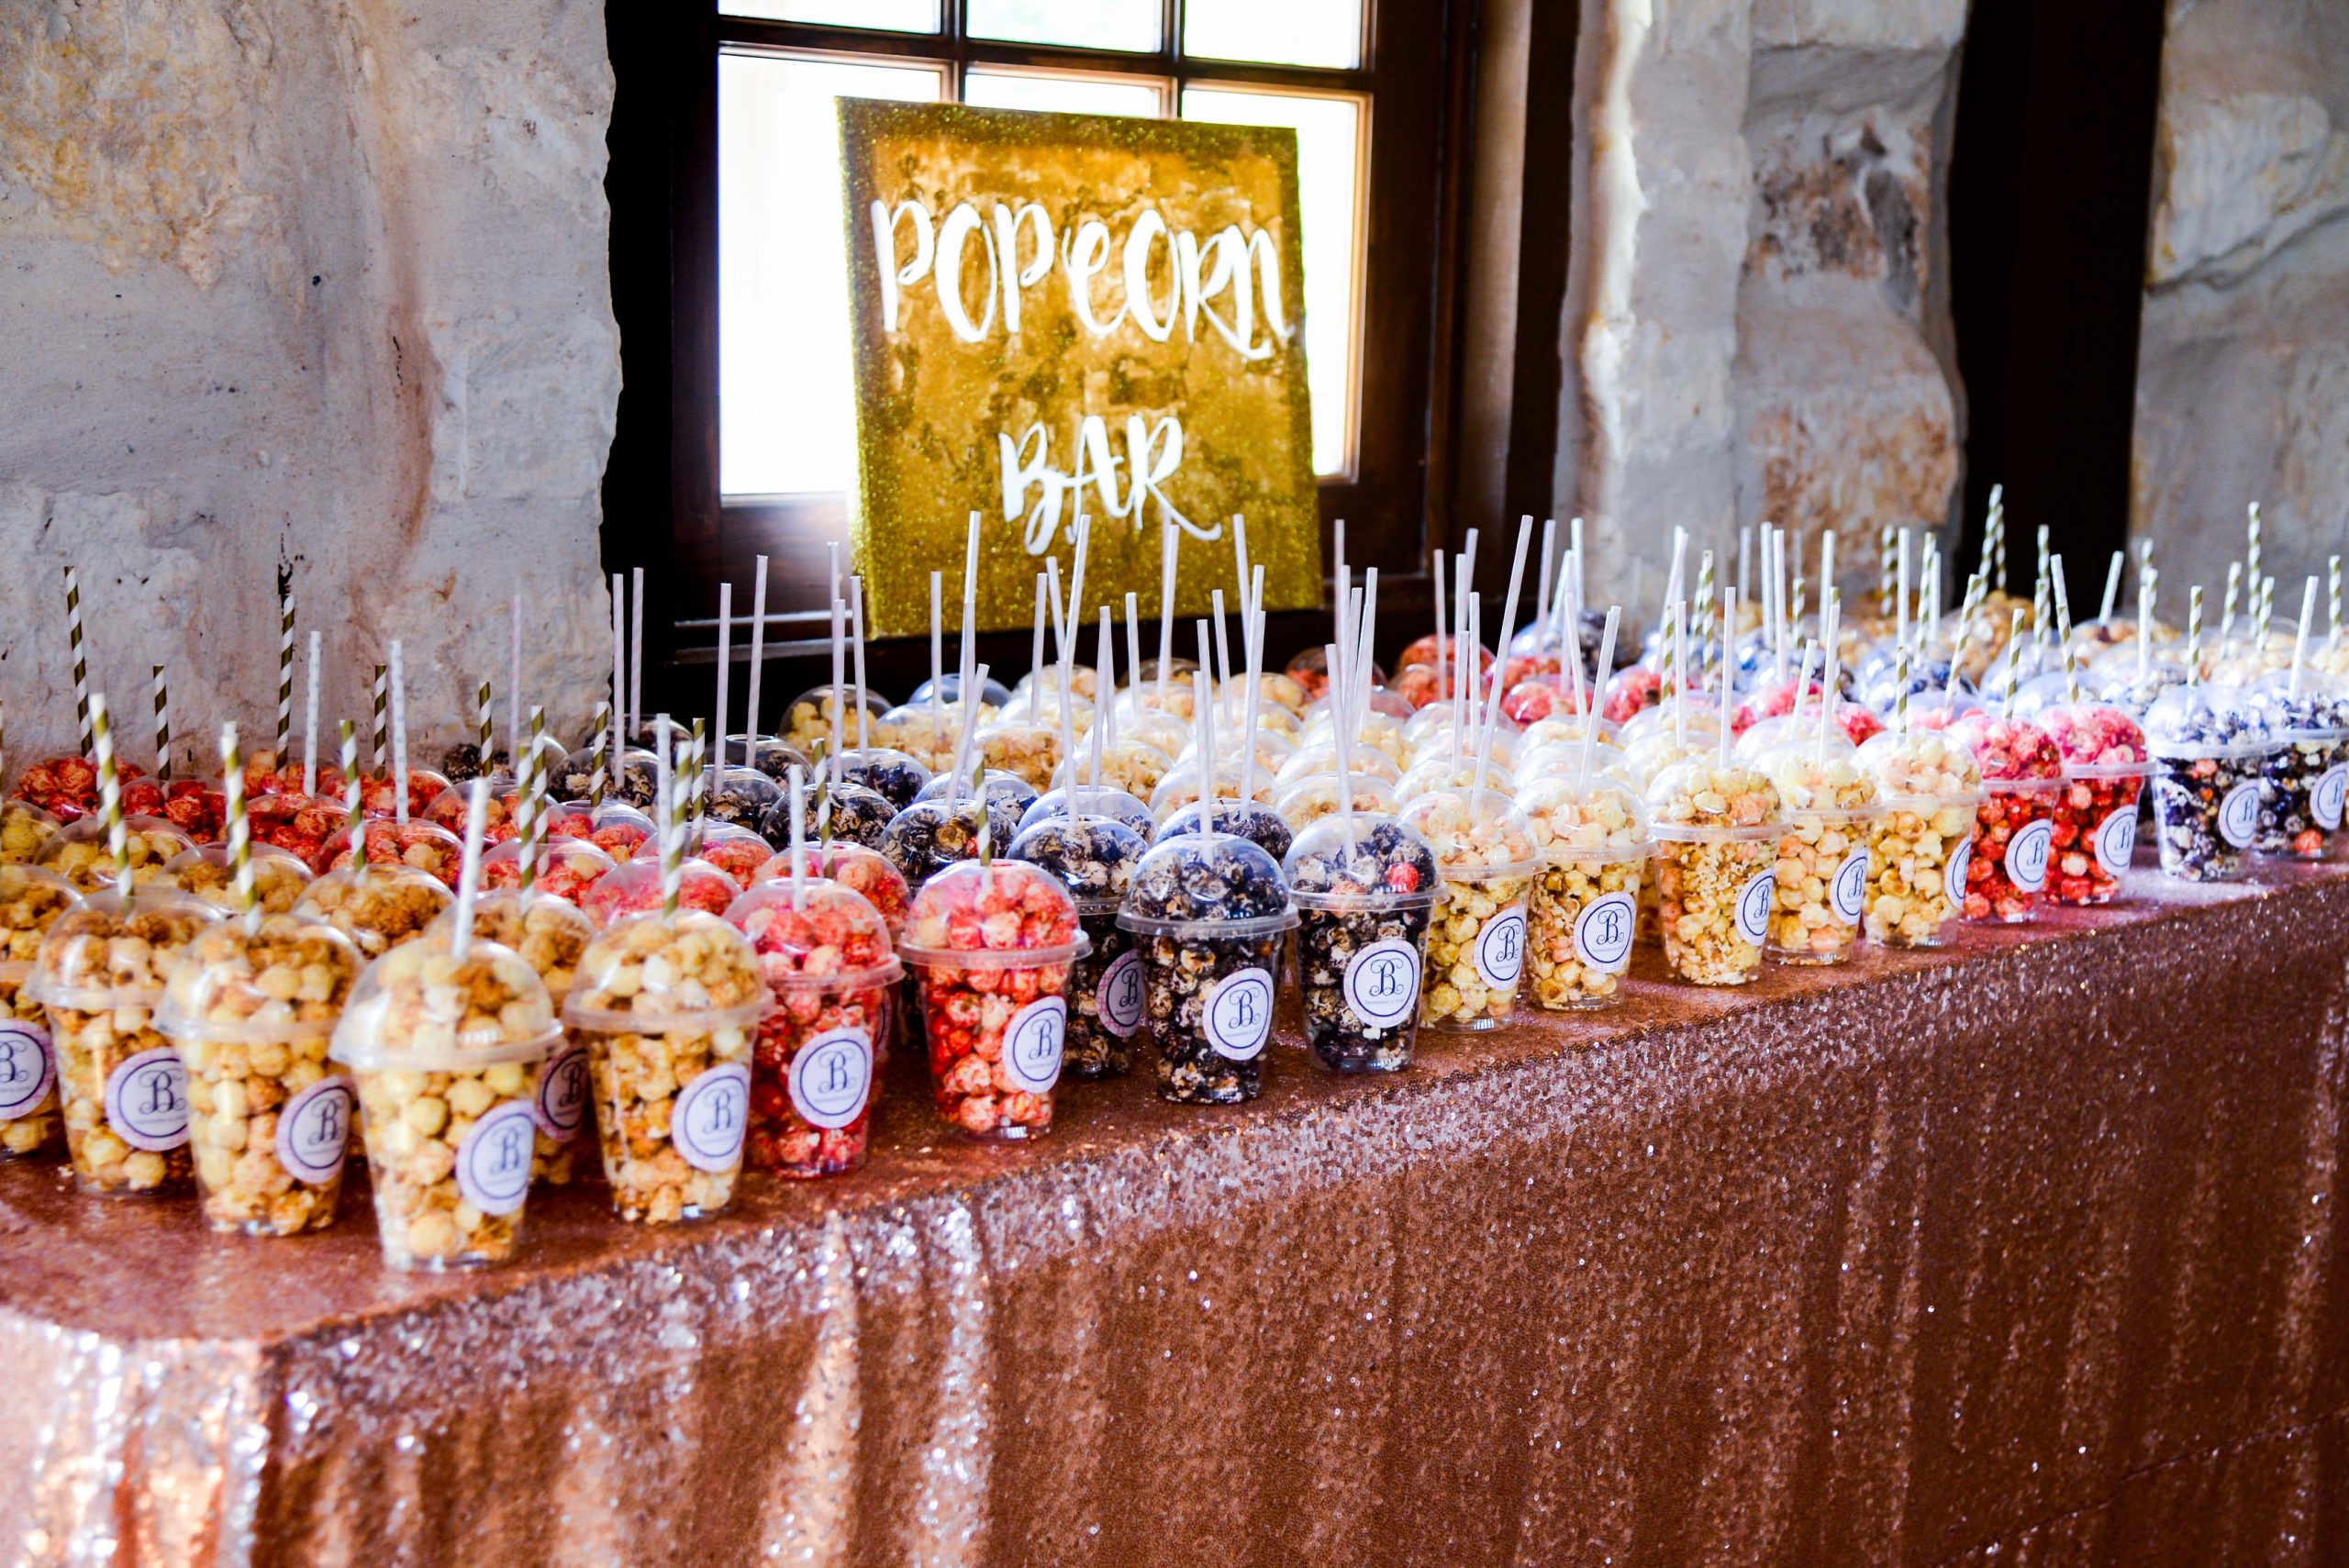 Planning to have a popcorn bar at your wedding? Here's all the inspiration you need for an impactful popcorn bar to make your wedding iconic!